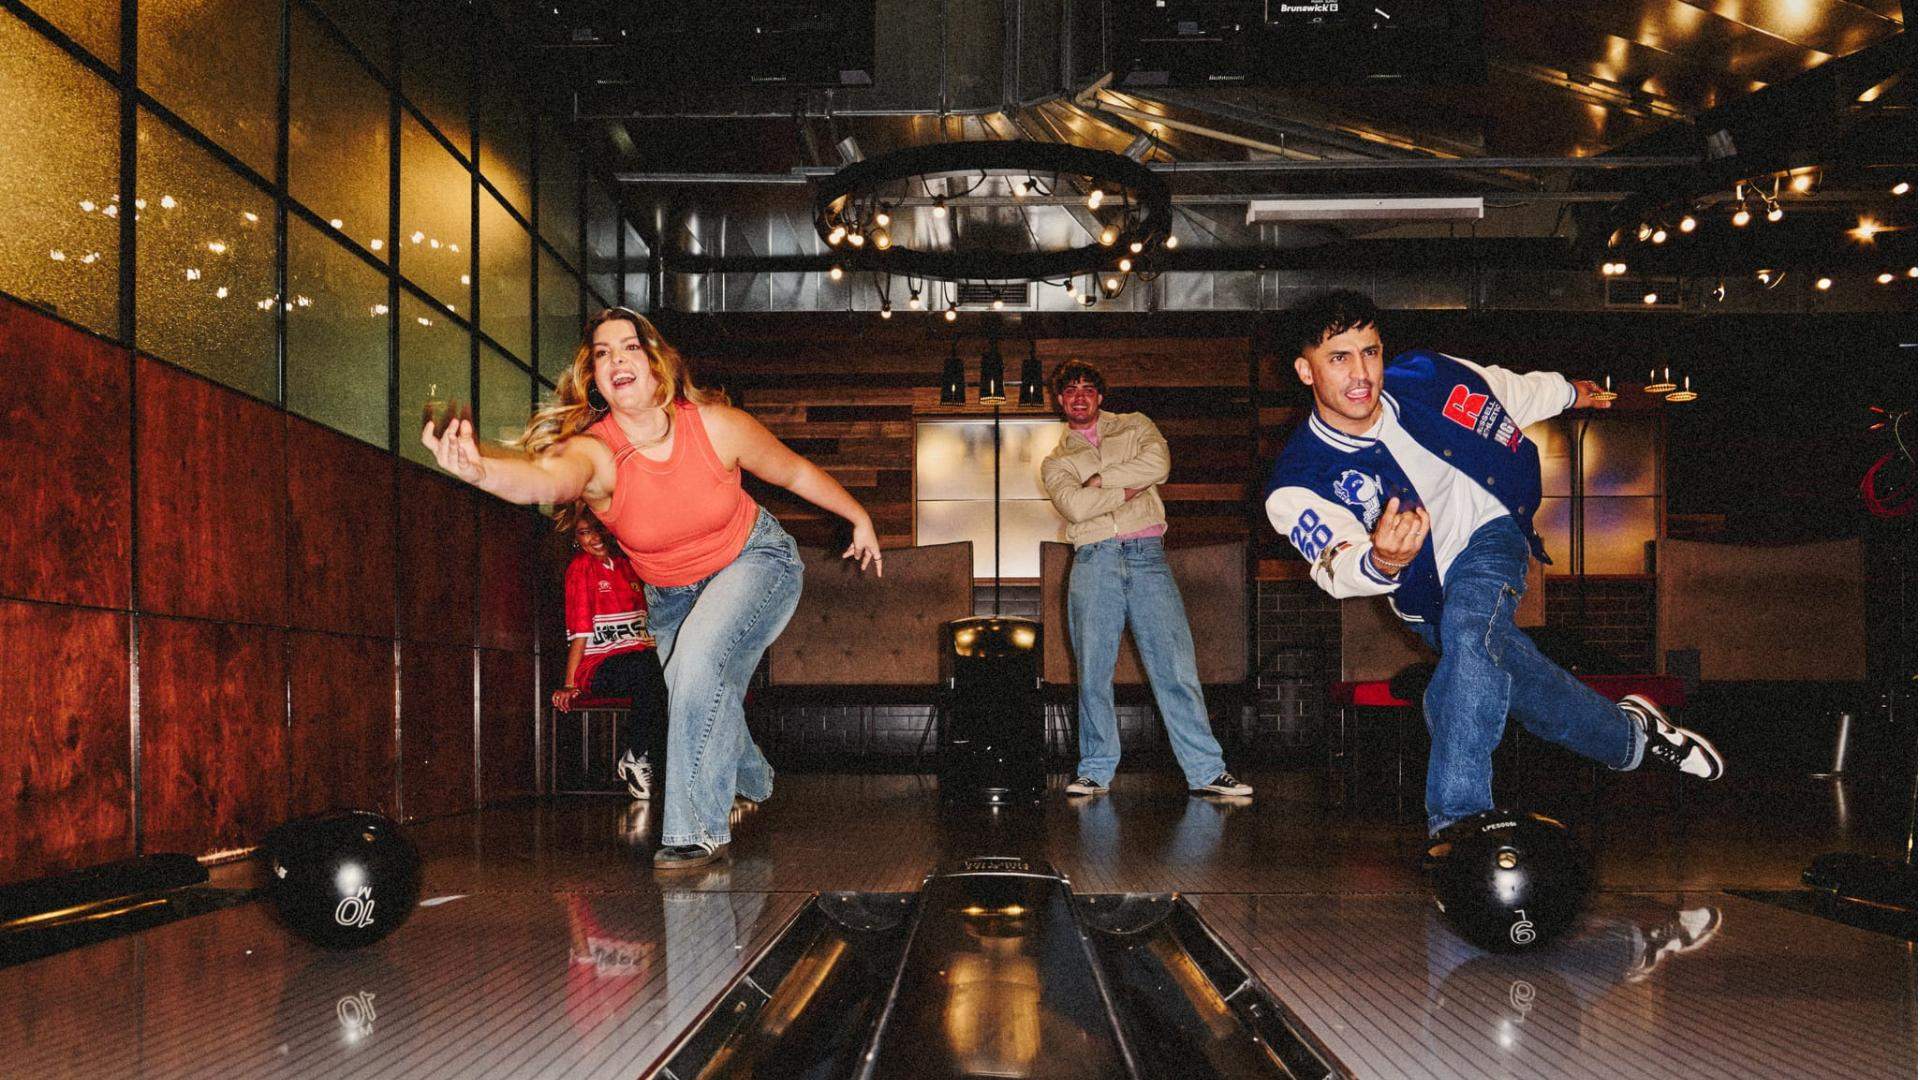 Score $10 Activities, Cocktails and Tacos at Archie Brothers, Holey Moley and Strike Bowling This Summer